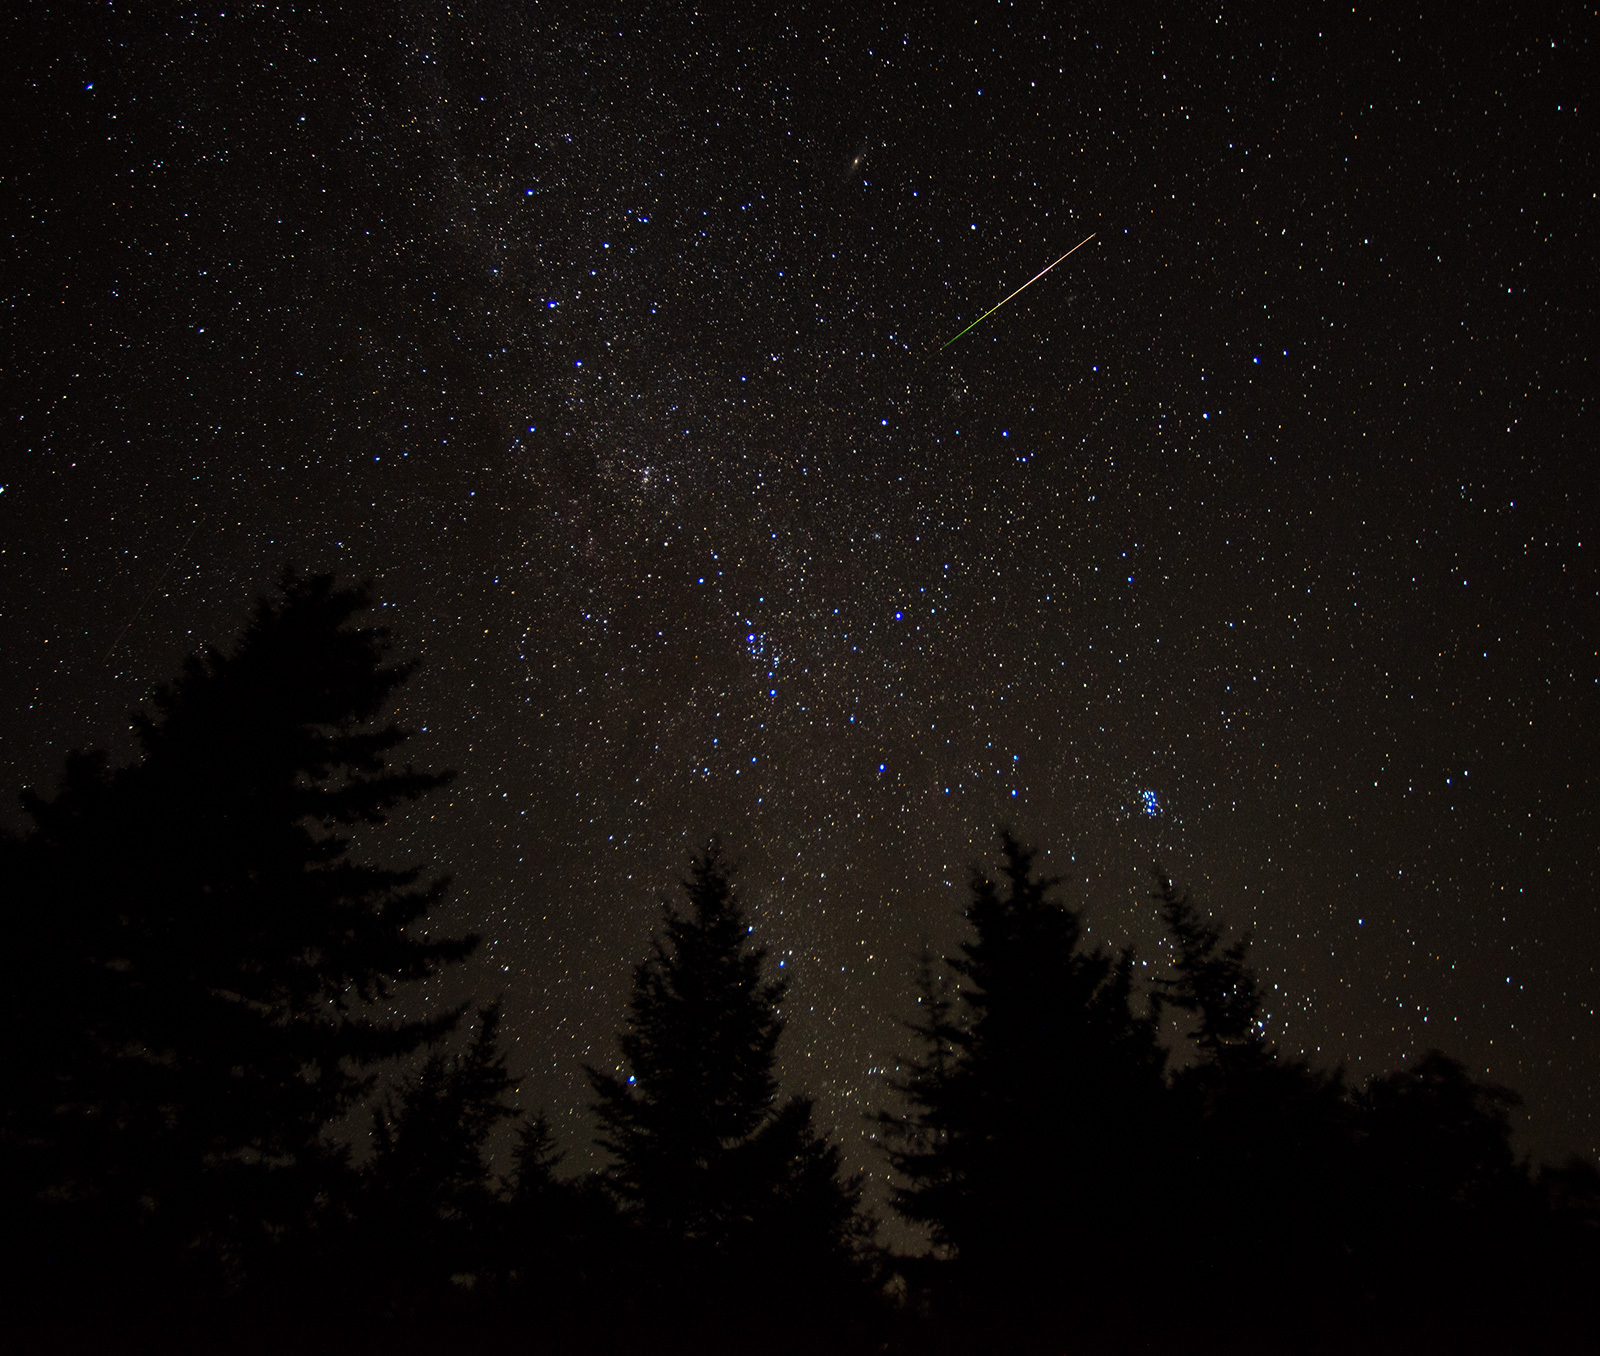 Meteor streak over a forest.